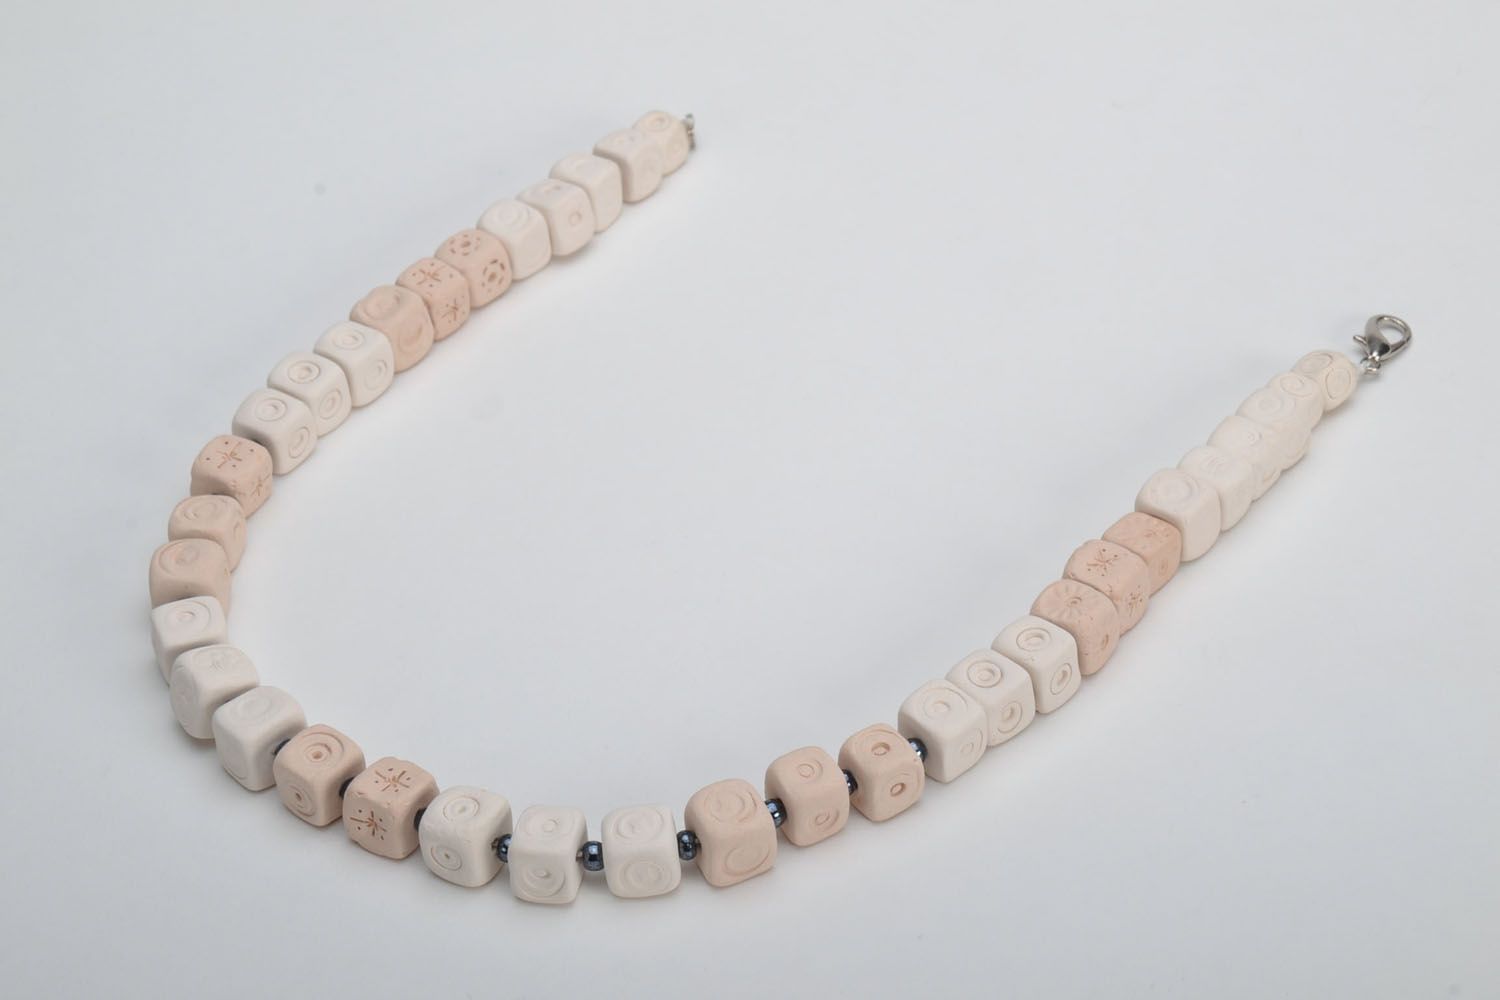 Bead necklace in eco style photo 4